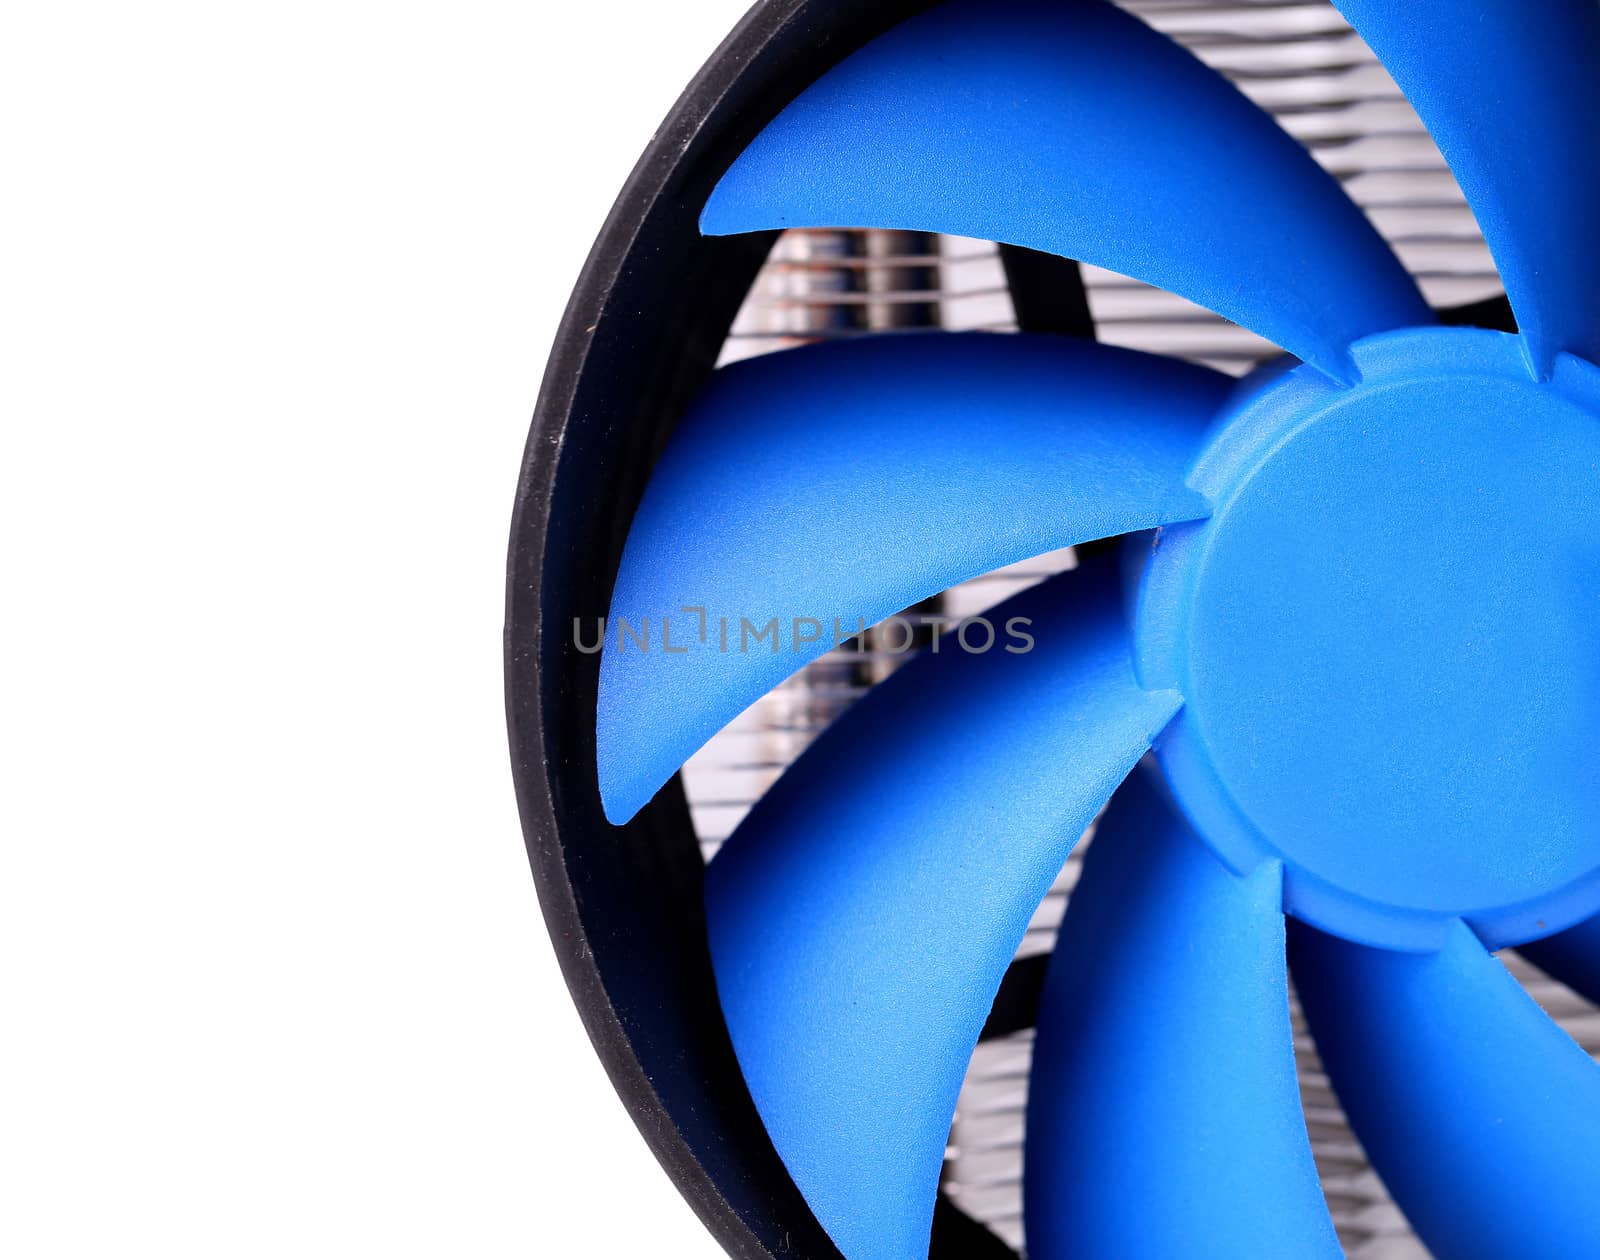 Powerful computer cooler with blue fun is located right on the white background